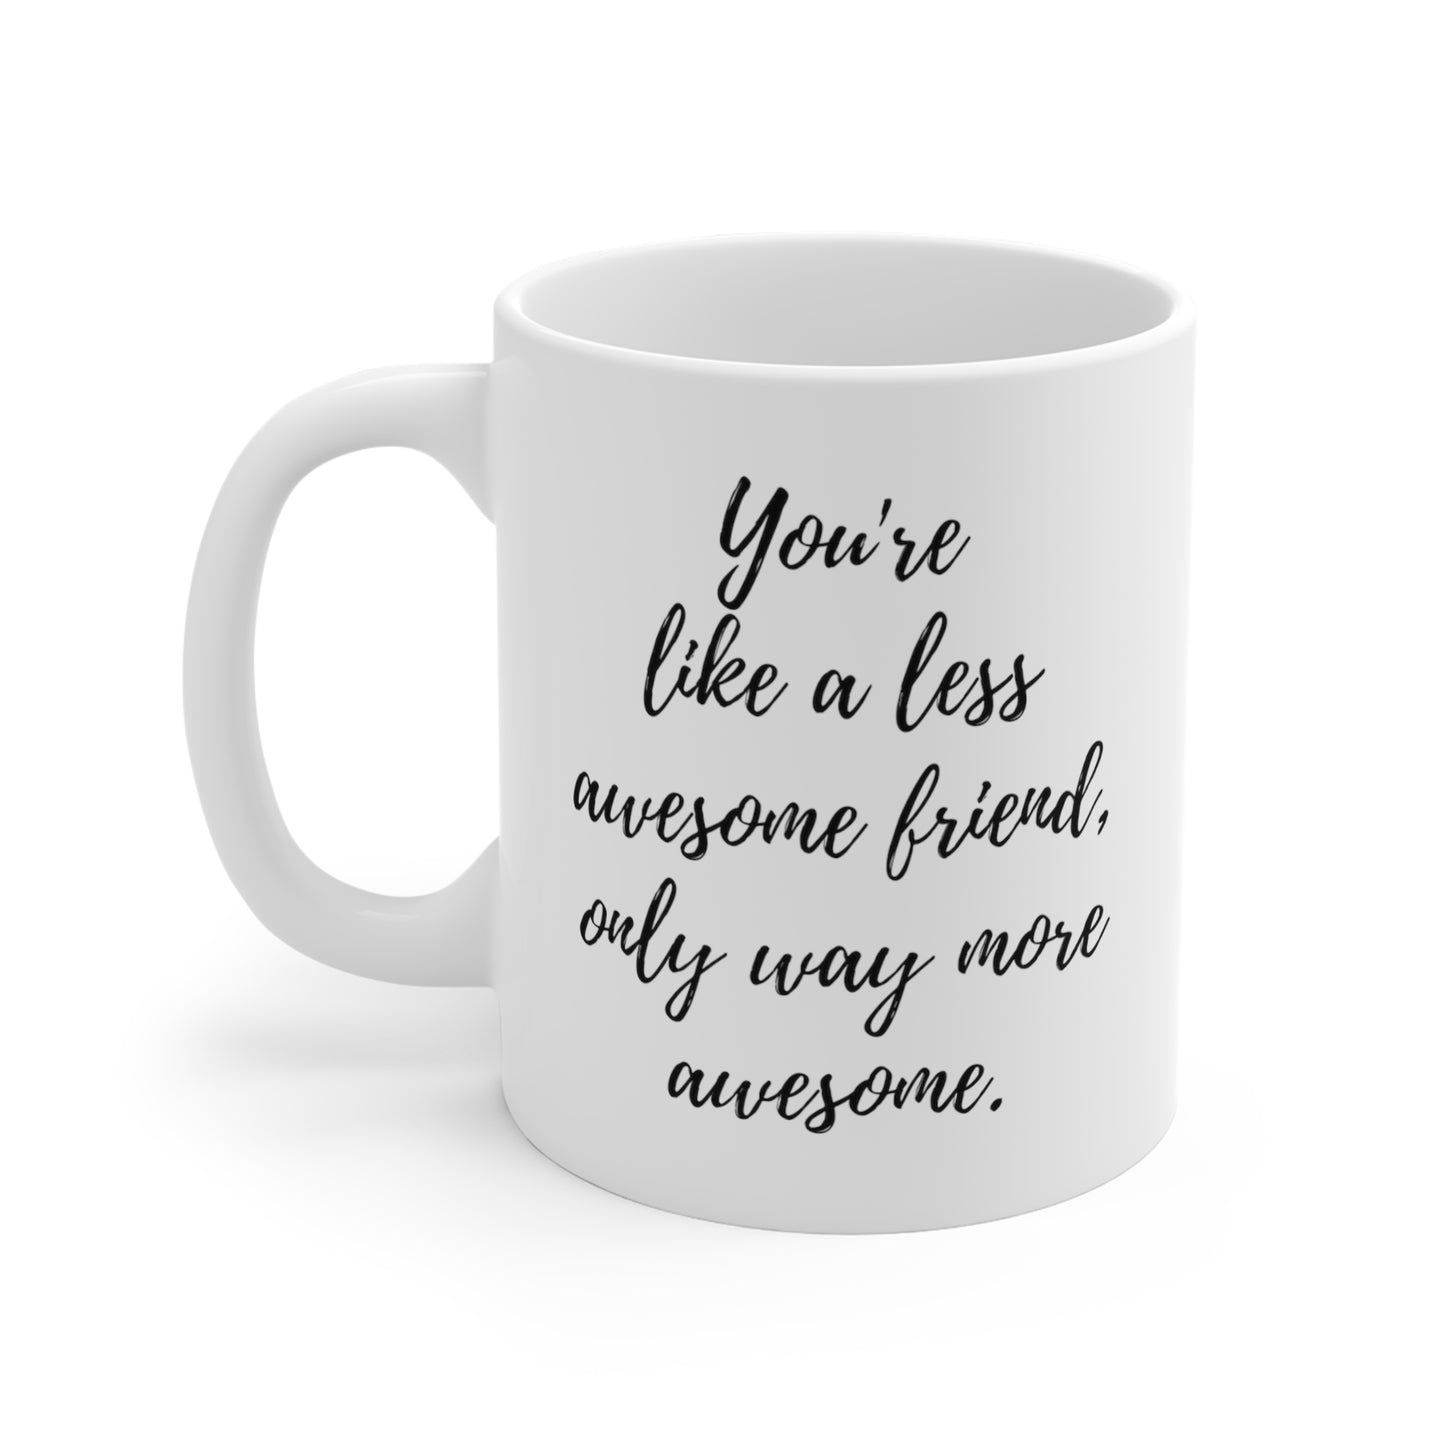 You're Like A Less Awesome Friend, Only Way More Awesome | Funny, Snarky Gift | White Ceramic Mug, Script Font